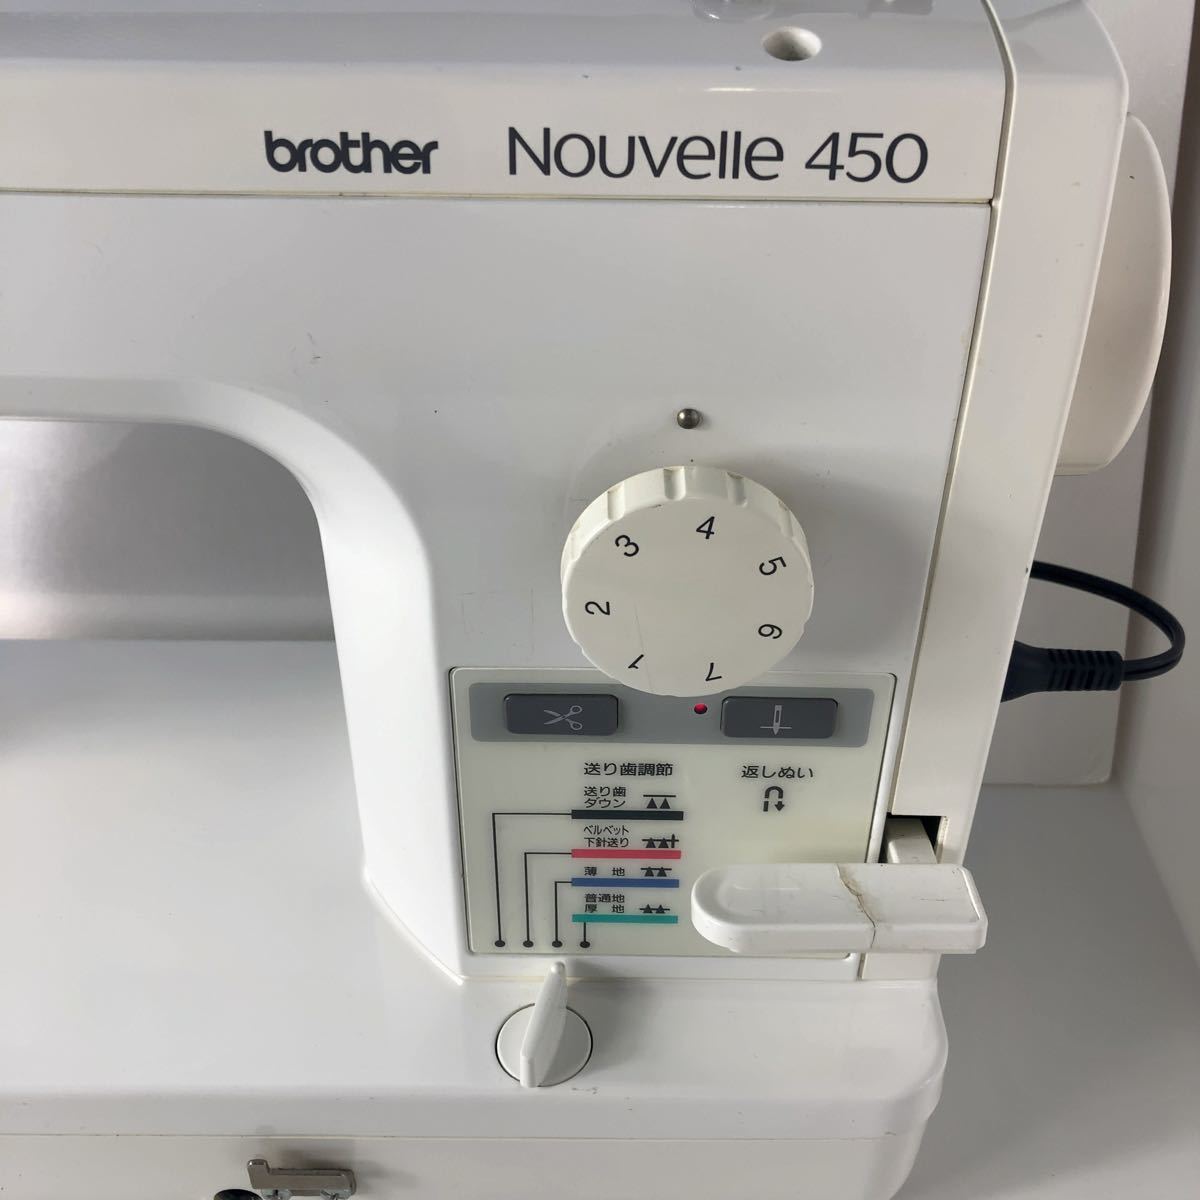 brother nouvelle 450 ミシン